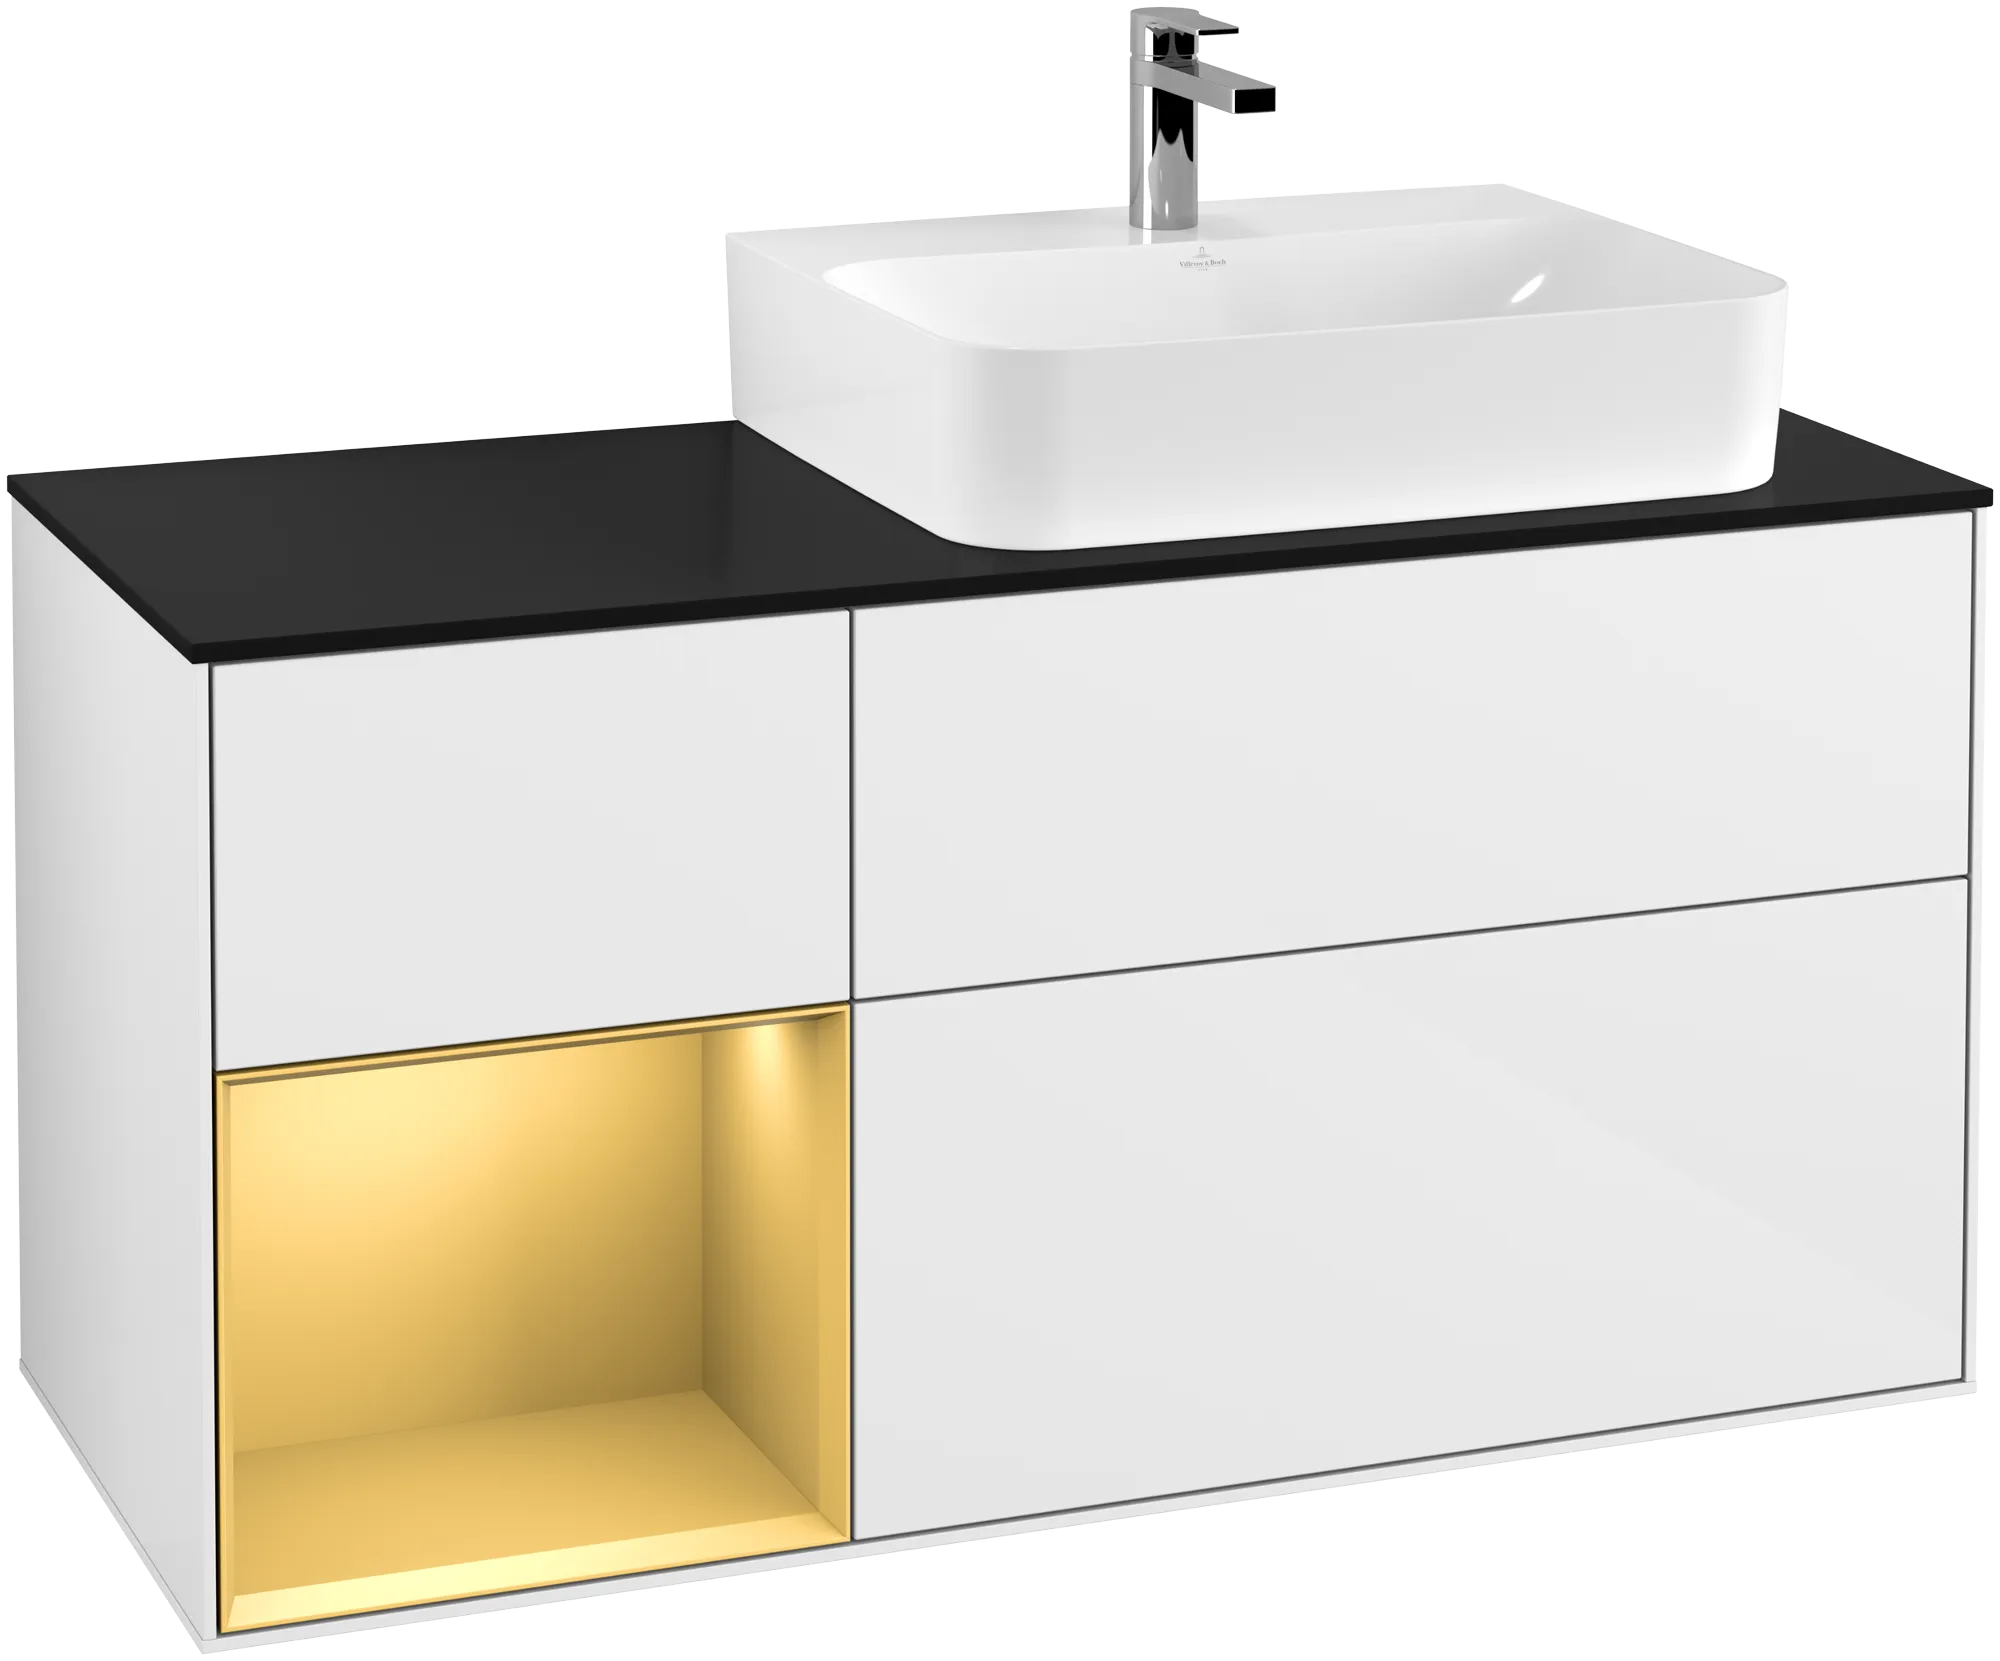 Picture of VILLEROY BOCH Finion Vanity unit, with lighting, 3 pull-out compartments, 1200 x 603 x 501 mm, Glossy White Lacquer / Gold Matt Lacquer / Glass Black Matt #G142HFGF